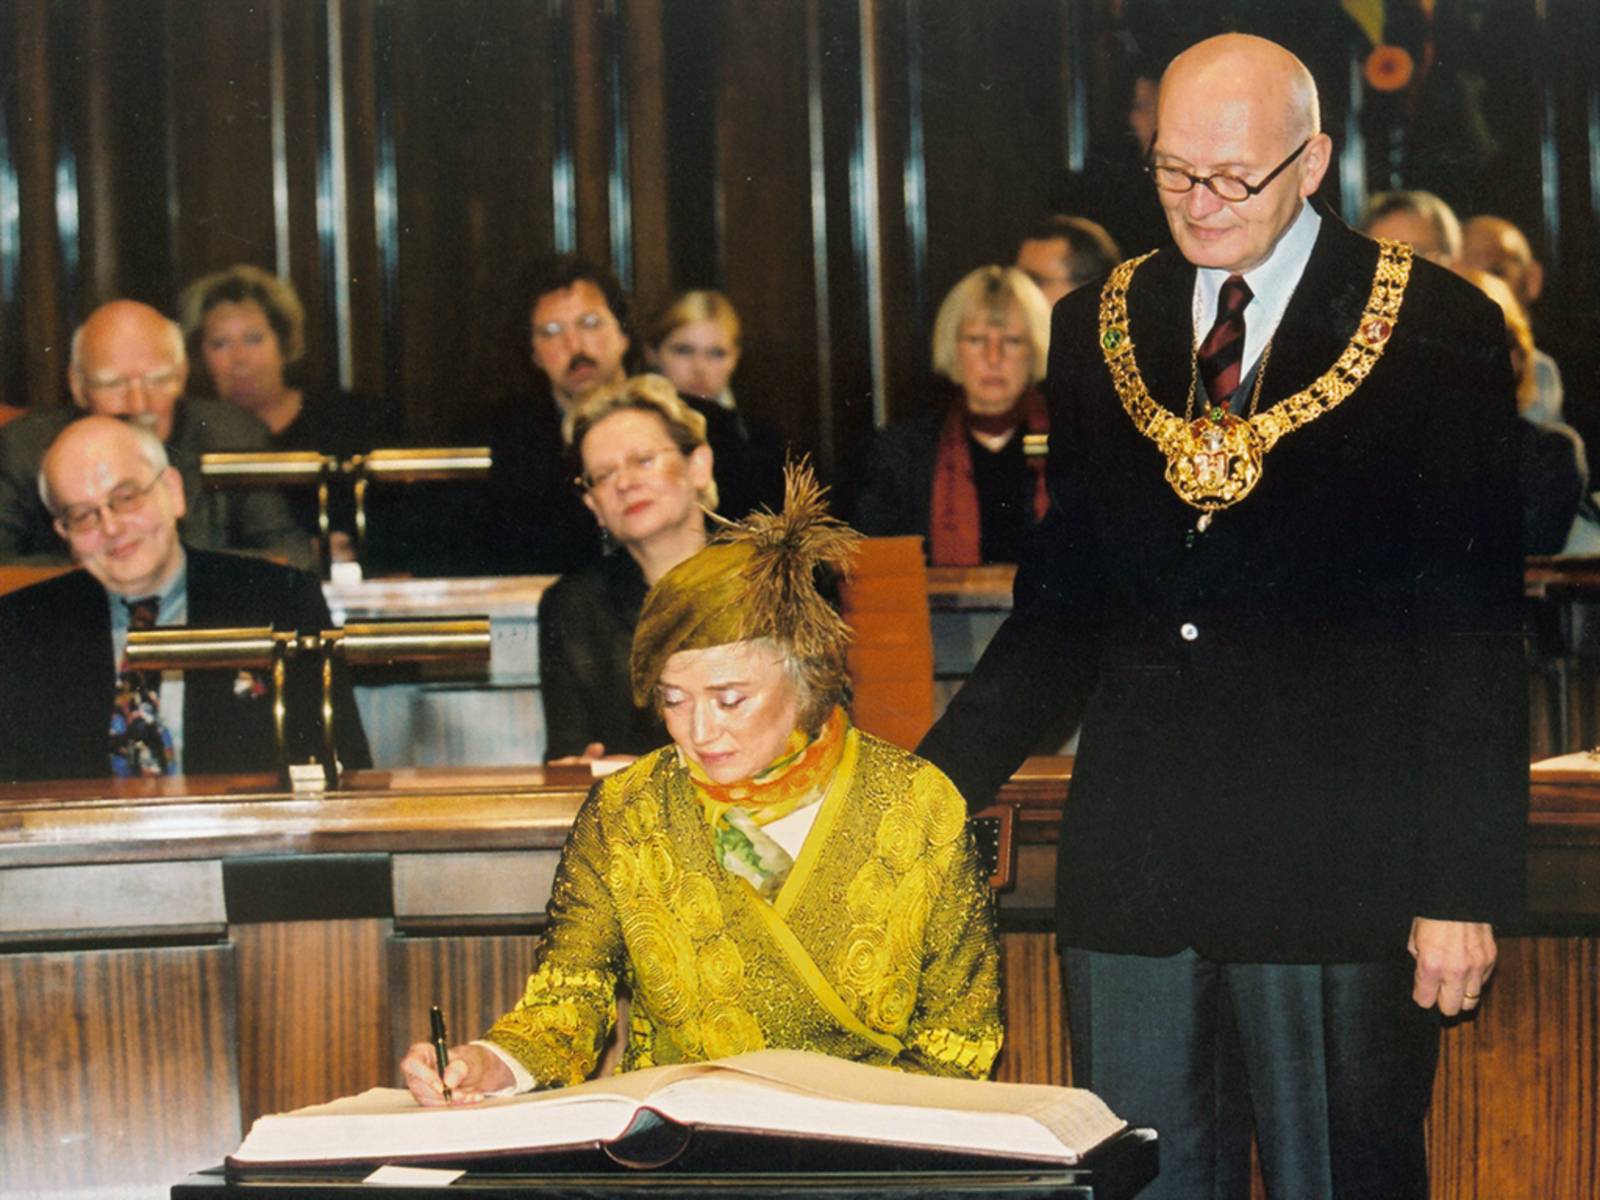 A lady in a yellowish dress signs a book, next to her a bald-headed man watching over her shoulder; many more people in the background